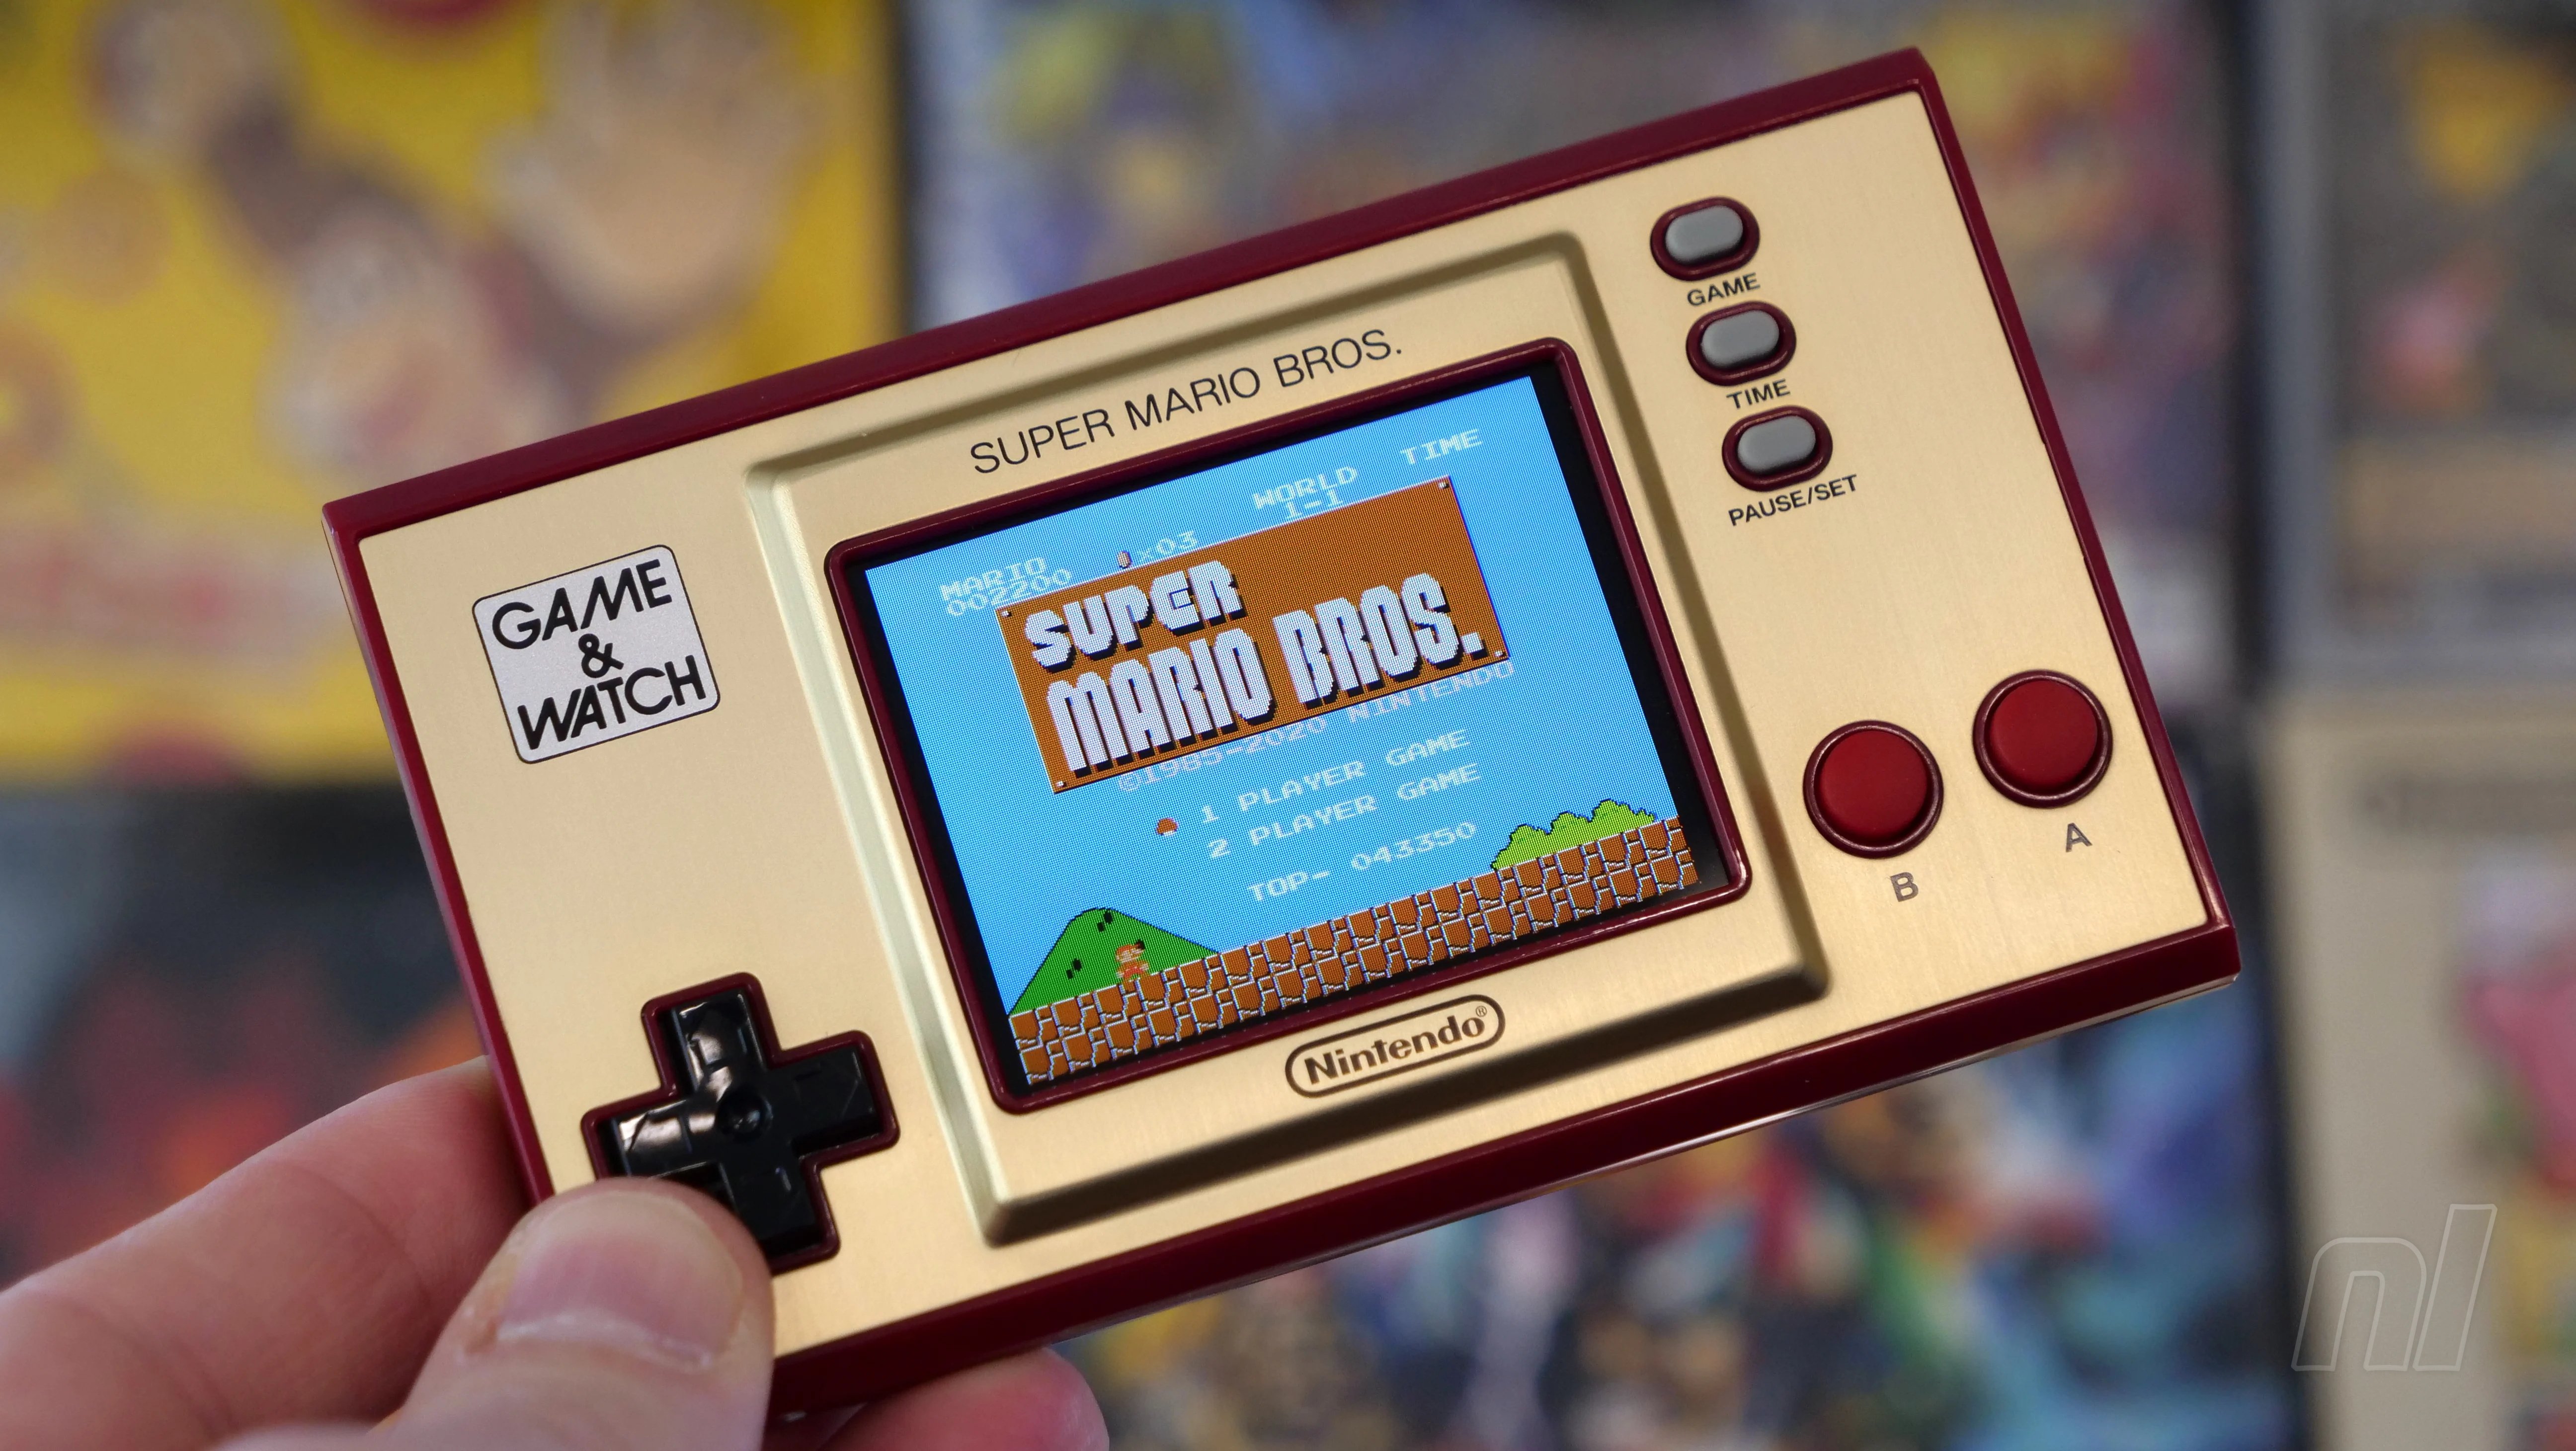 game and watch super mario bros best buy